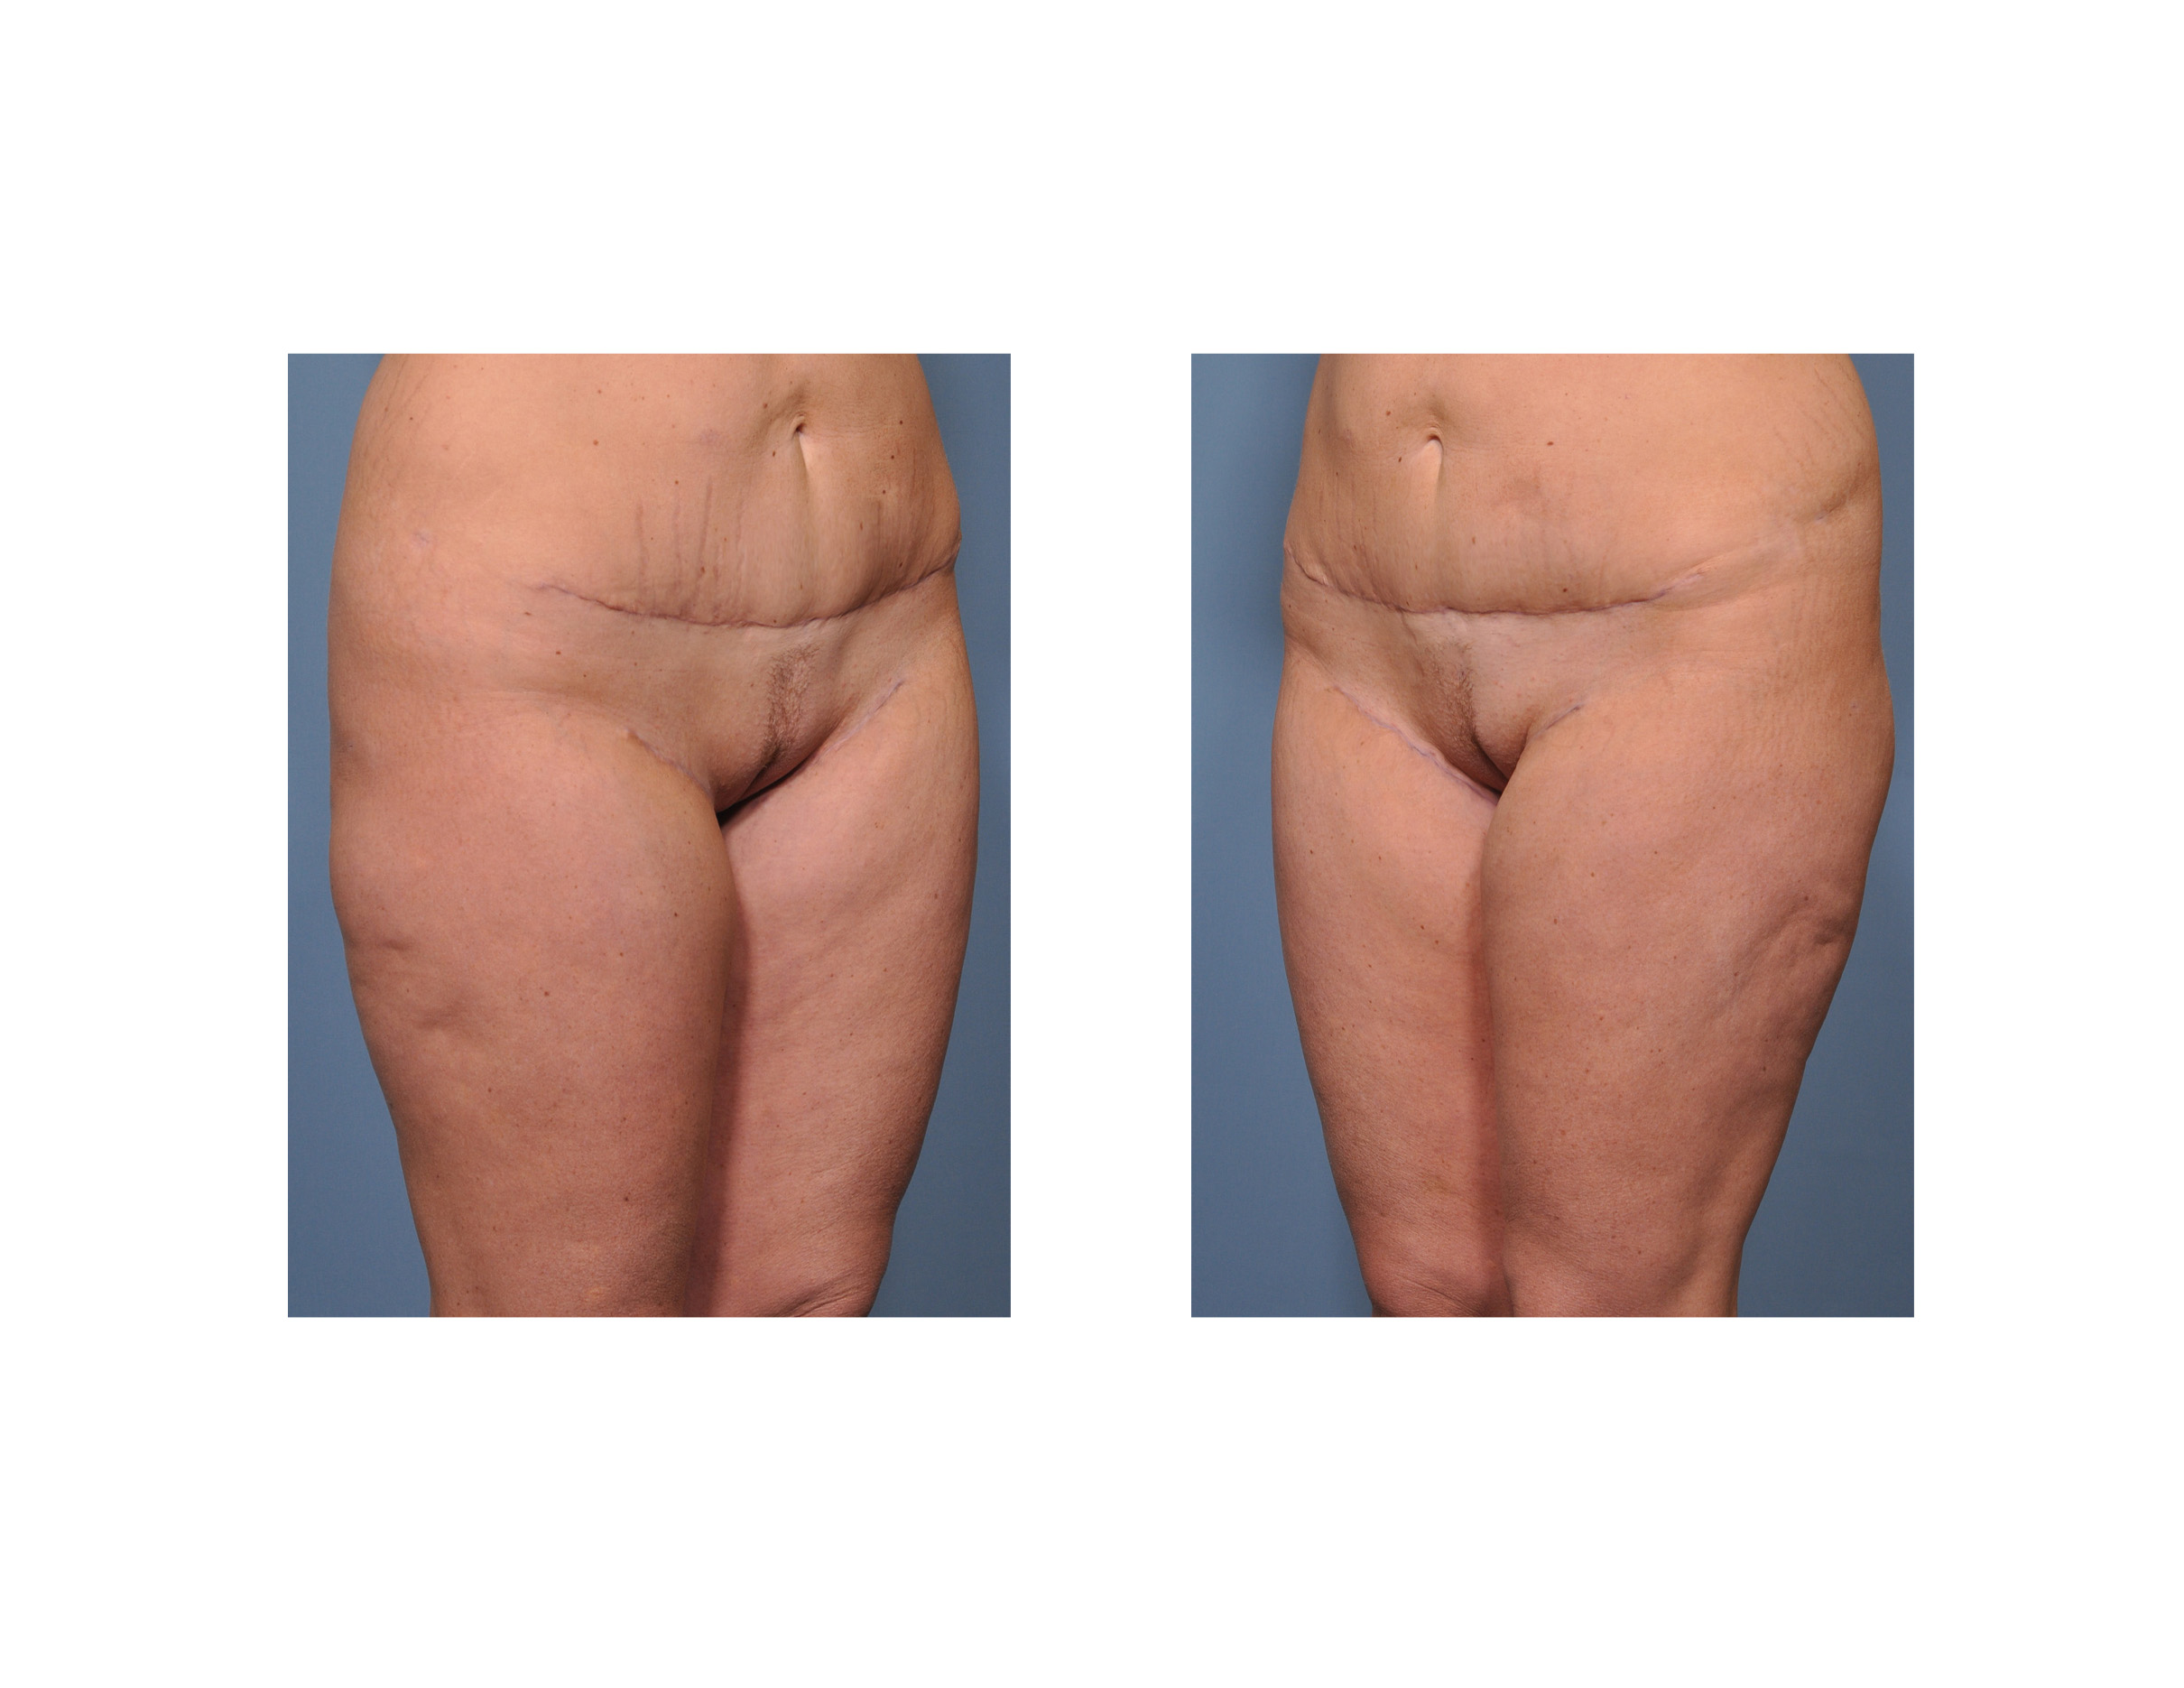 Thigh Lift Scars: Where Are Incisions For Different Thigh Lifts Made?